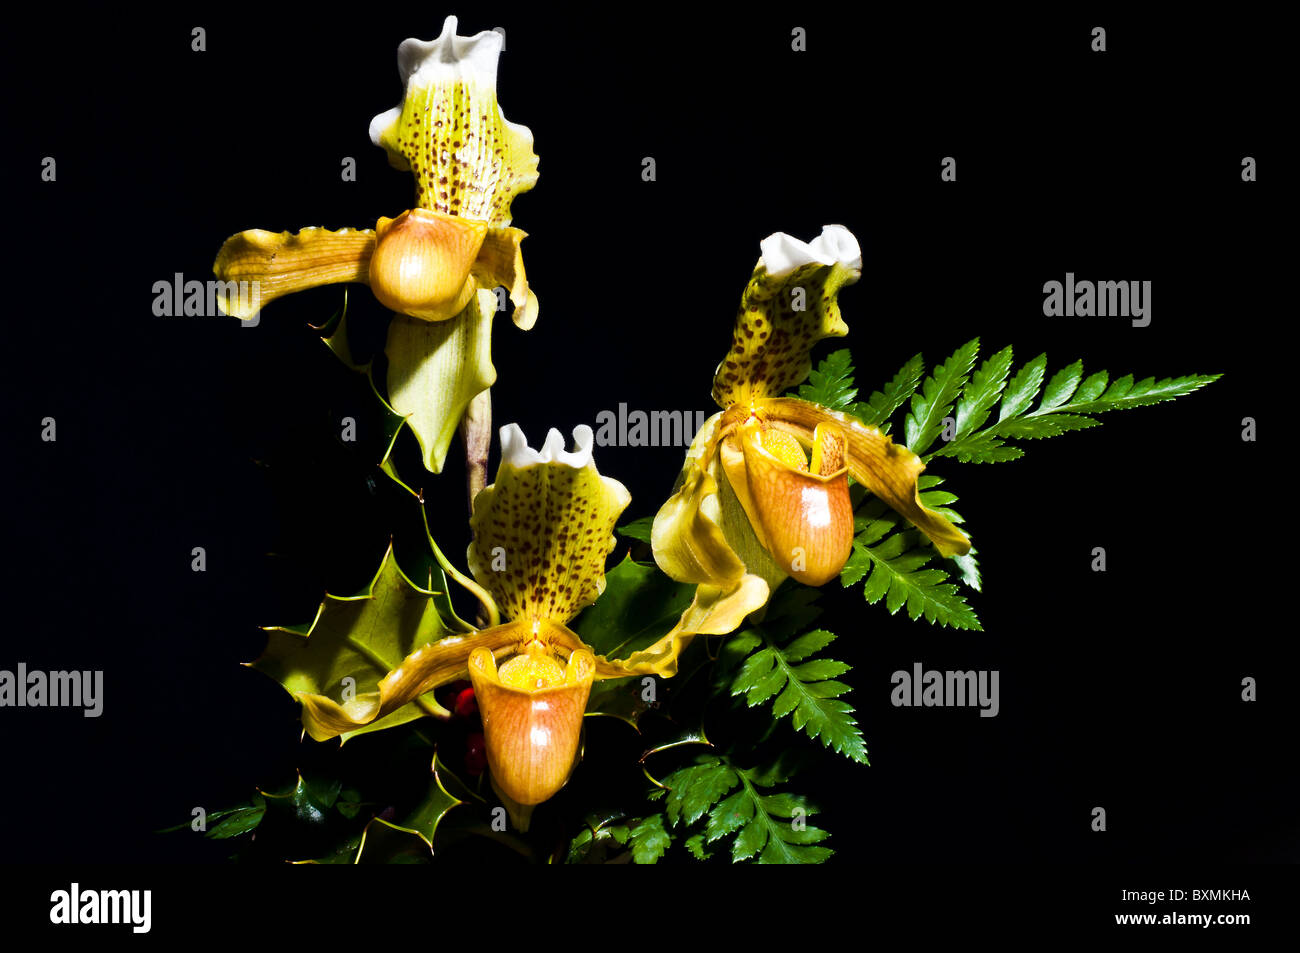 Three orchids  paphiopedilum (flower exotic) portraits still-life horizontally on a black background between ferns and mistletoe Stock Photo